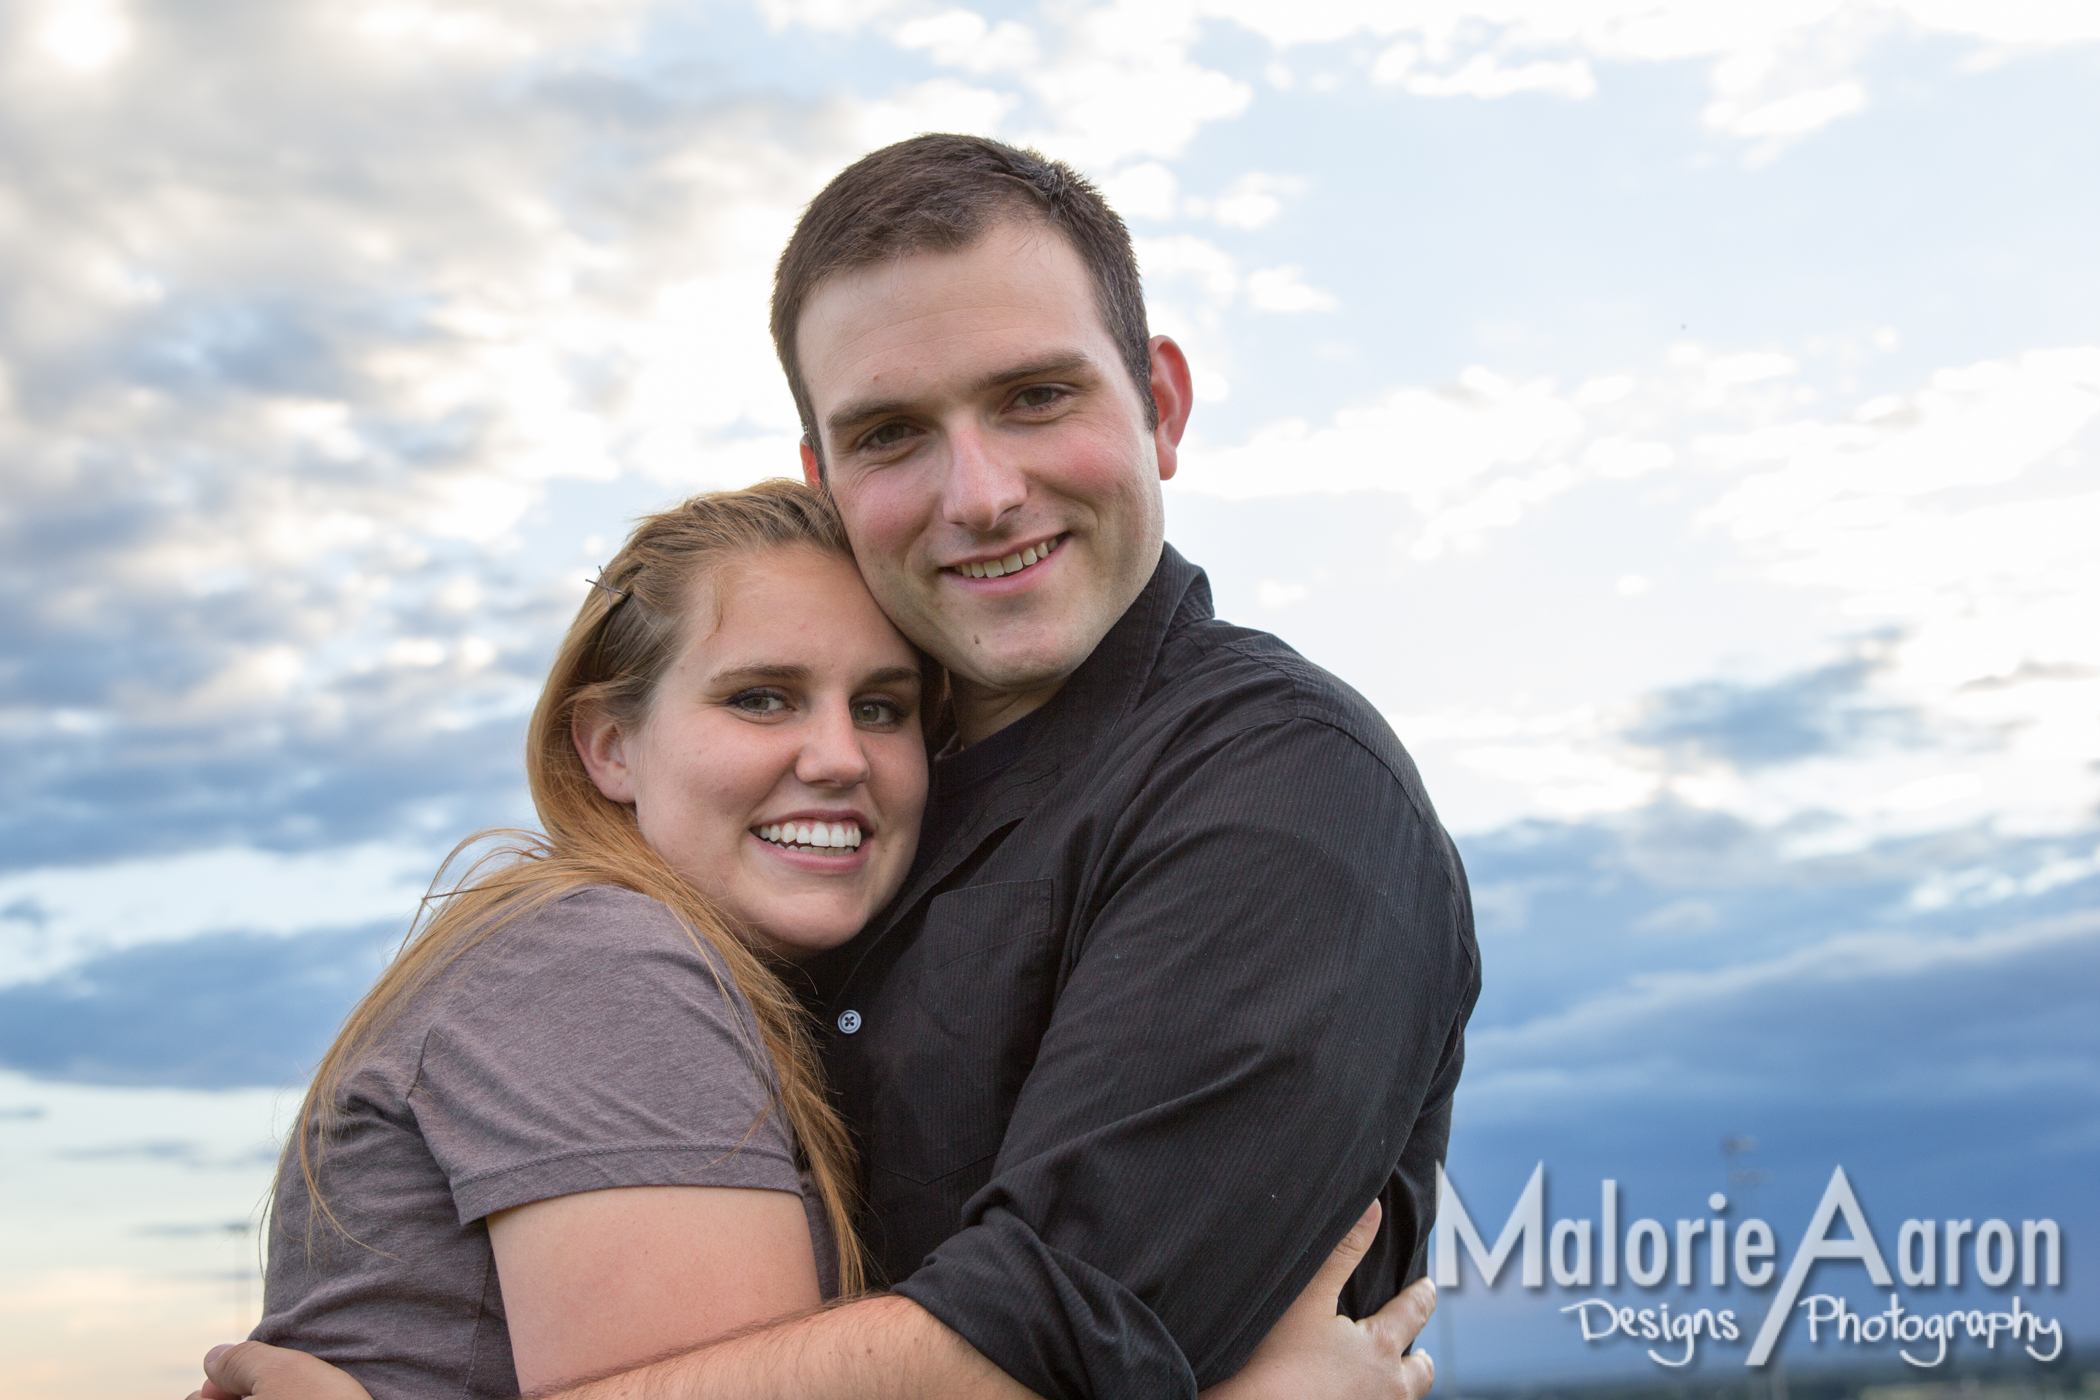 MalorieAaron, photography, Rexburg, wedding, proposal, LDS, temple, popping-the-question